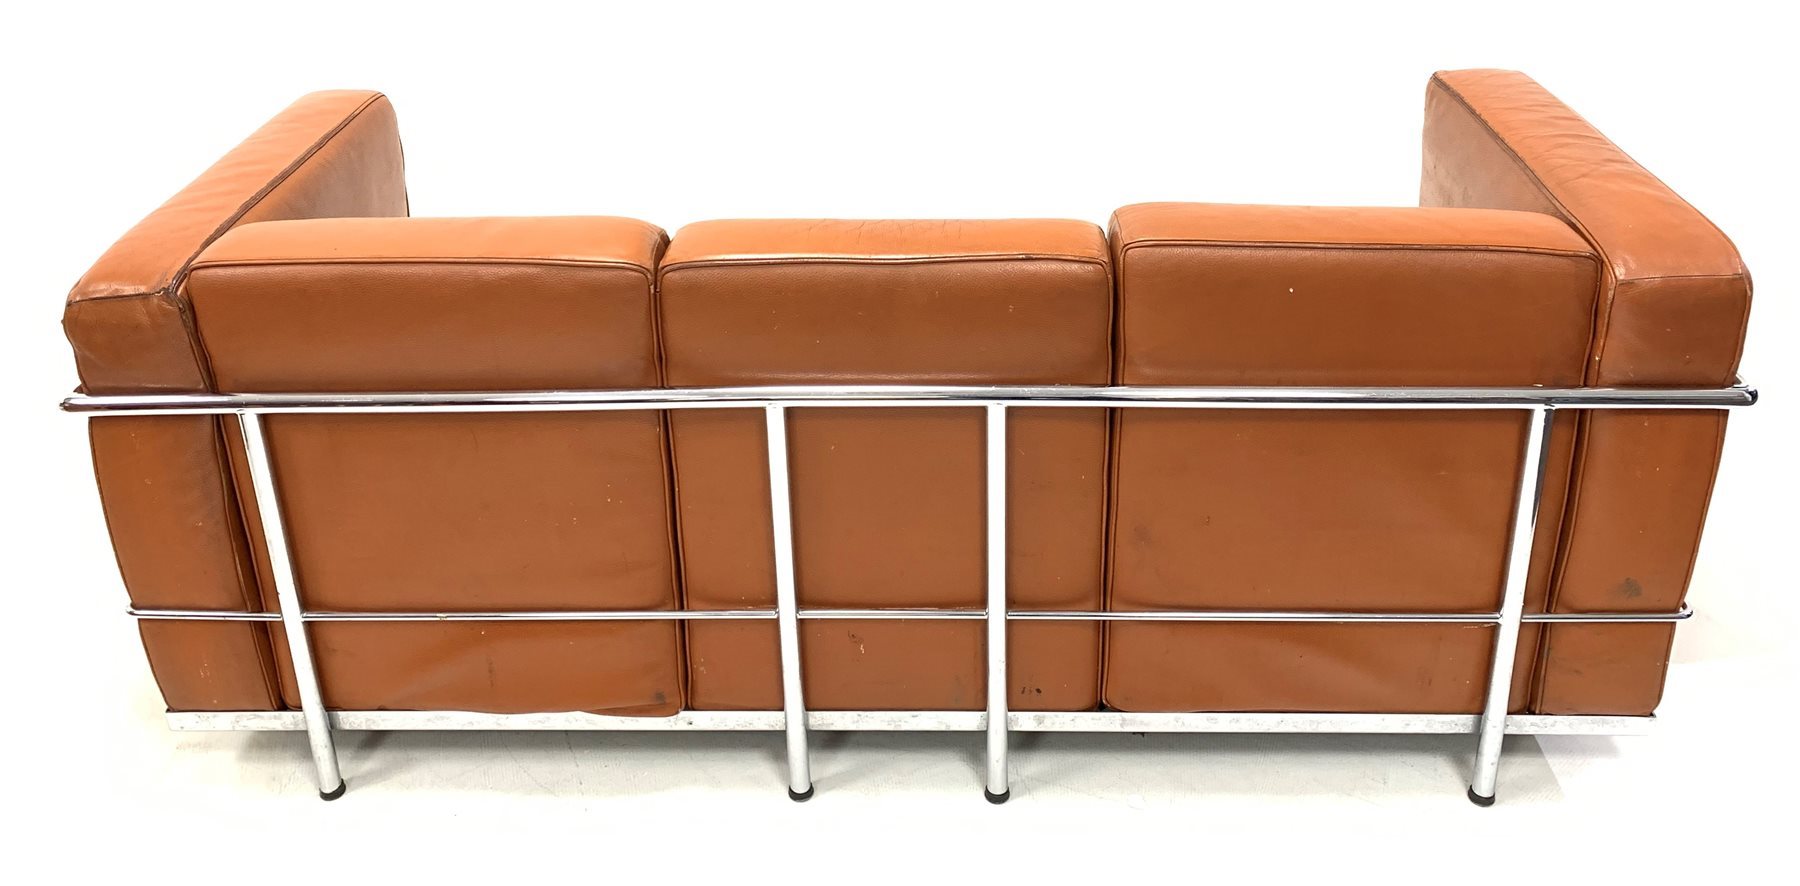 After Le Corbusier - Mid 20th century three seat sofa with chrome frame and brown leather upholstere - Image 3 of 3